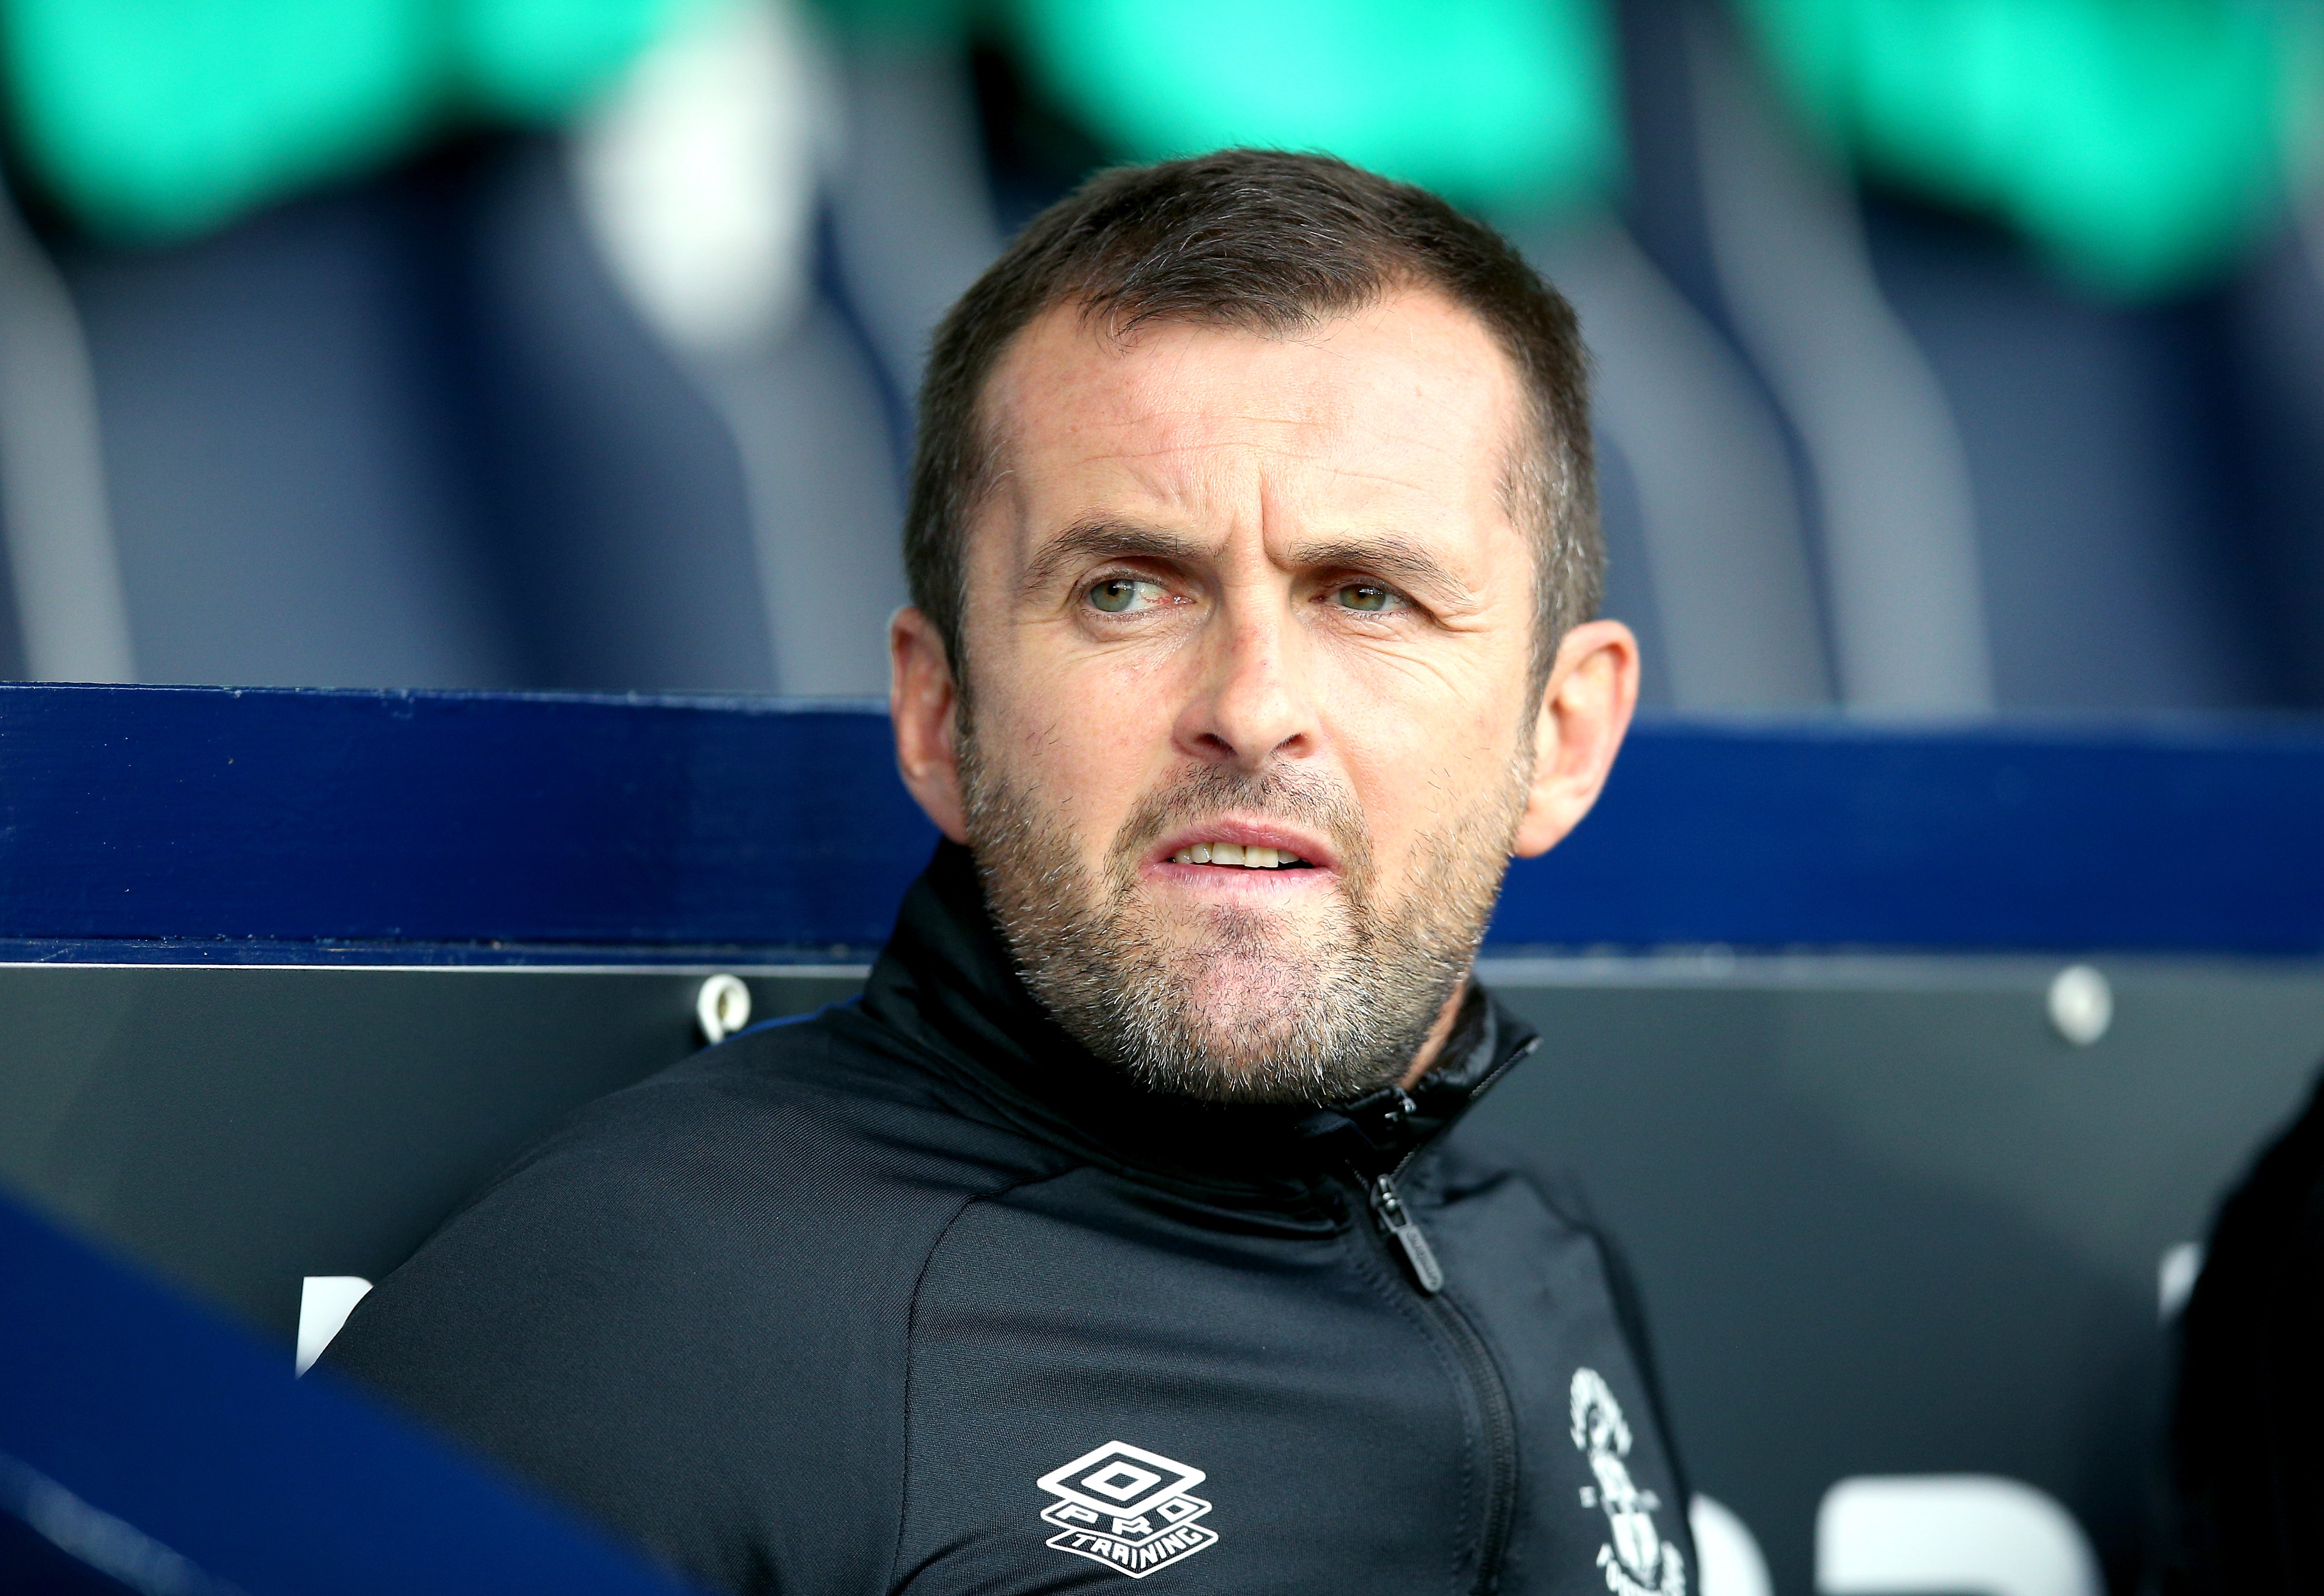 Luton manager Nathan Jones will join over 50 other members of staff at Luton in taking on the month-long fitness challenge for Prostate Cancer UK (Nigel French/PA)